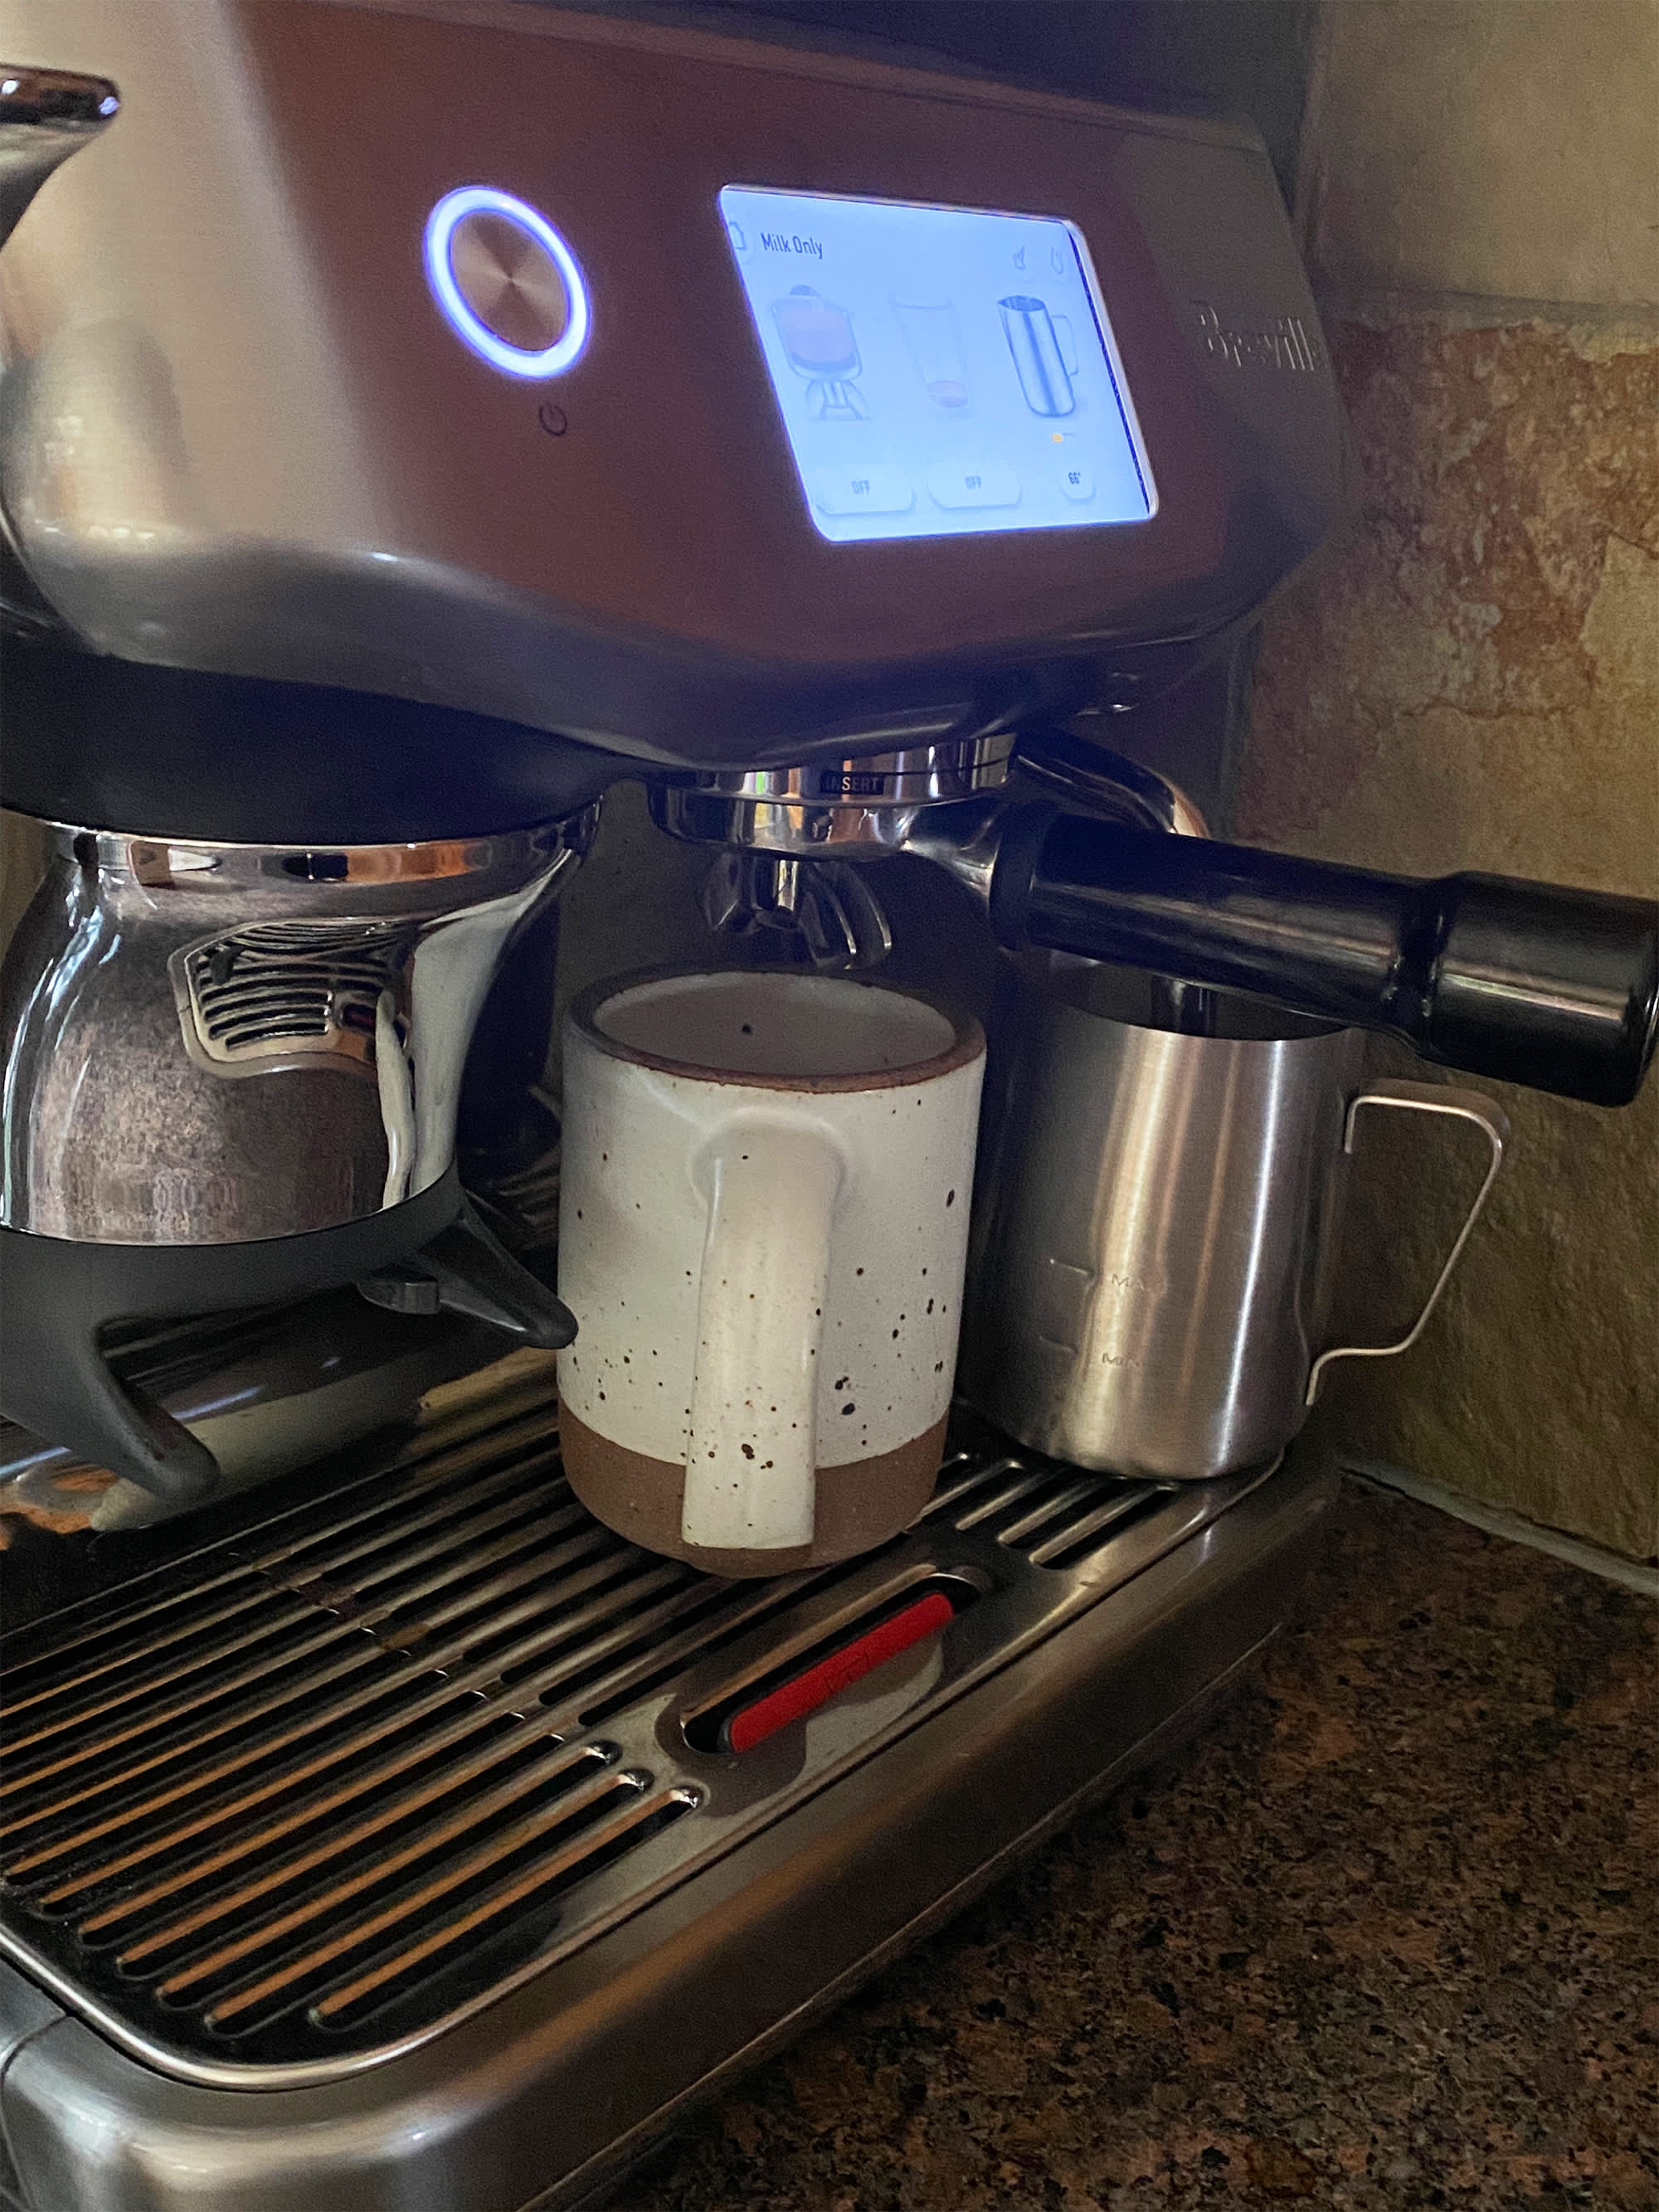 Breville Barista Touch Review: Is This Espresso Maker Worth It?